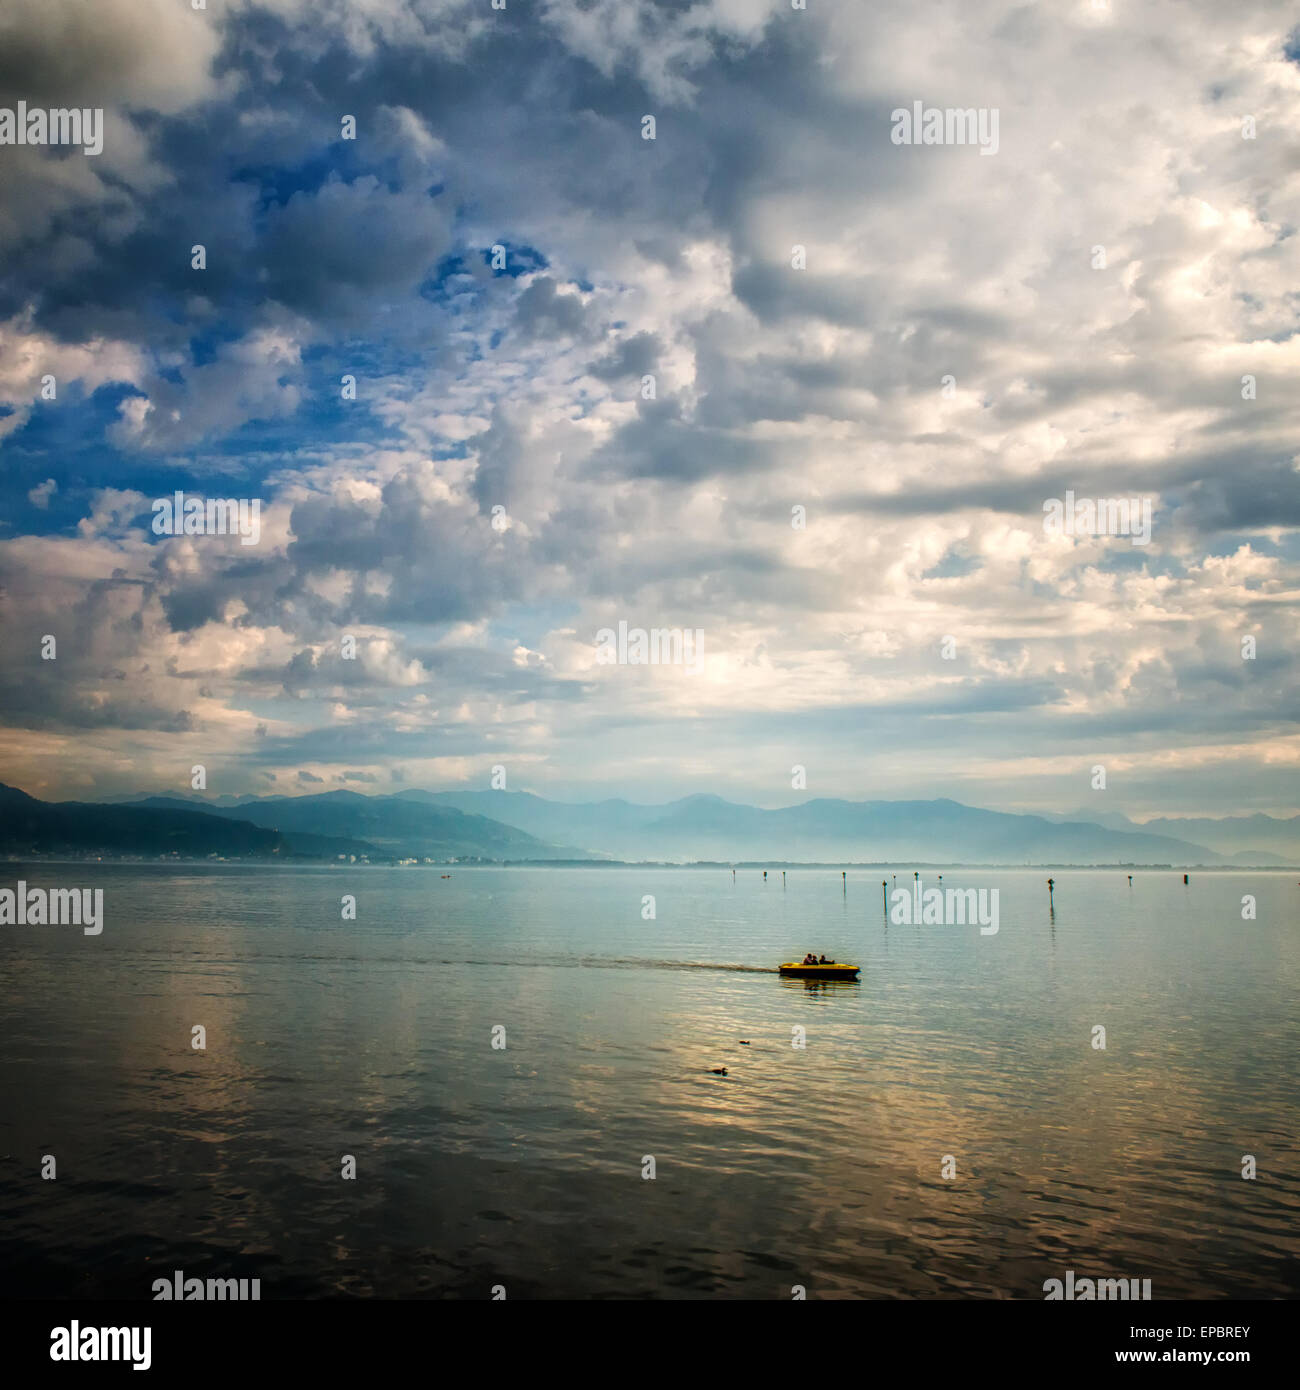 View of lake against cloudy sky, Lake Constance, Rhine River, Germany, Switzerland, Austria Stock Photo